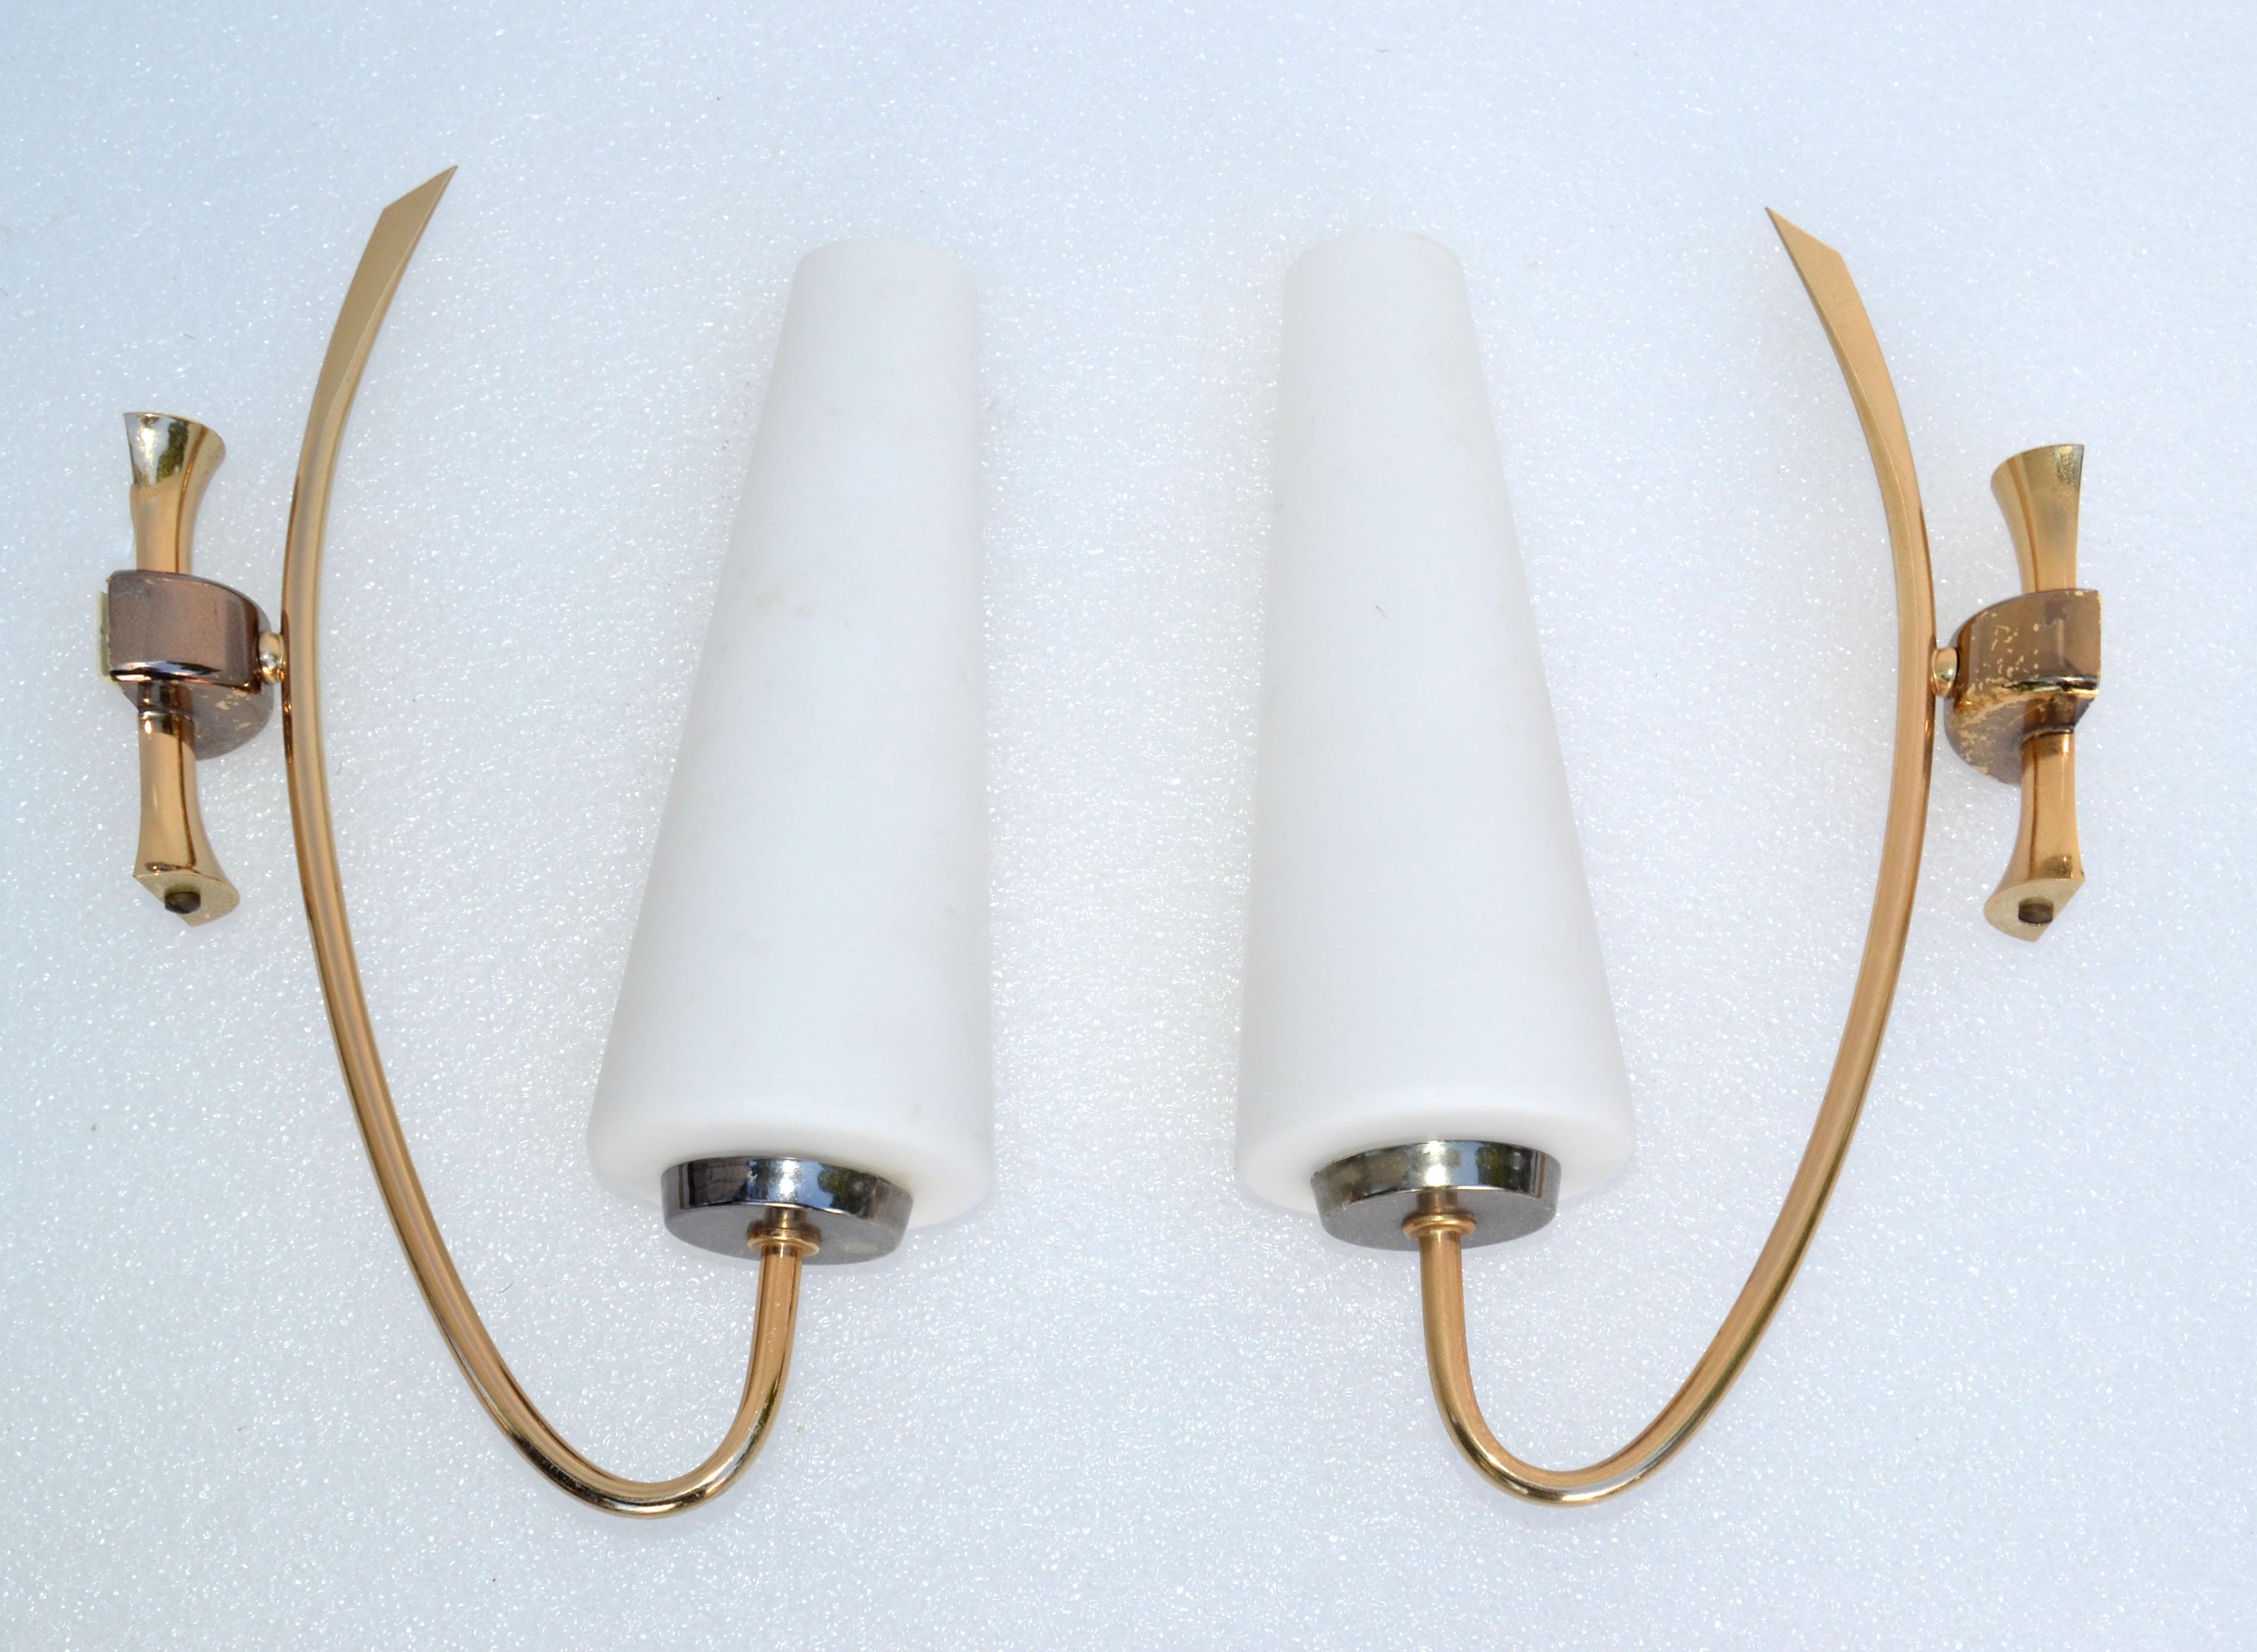 Maison Lunel Sconce 2 Tone Brass & Opaline Shade France Mid-Century Modern, Pair In Good Condition For Sale In Miami, FL